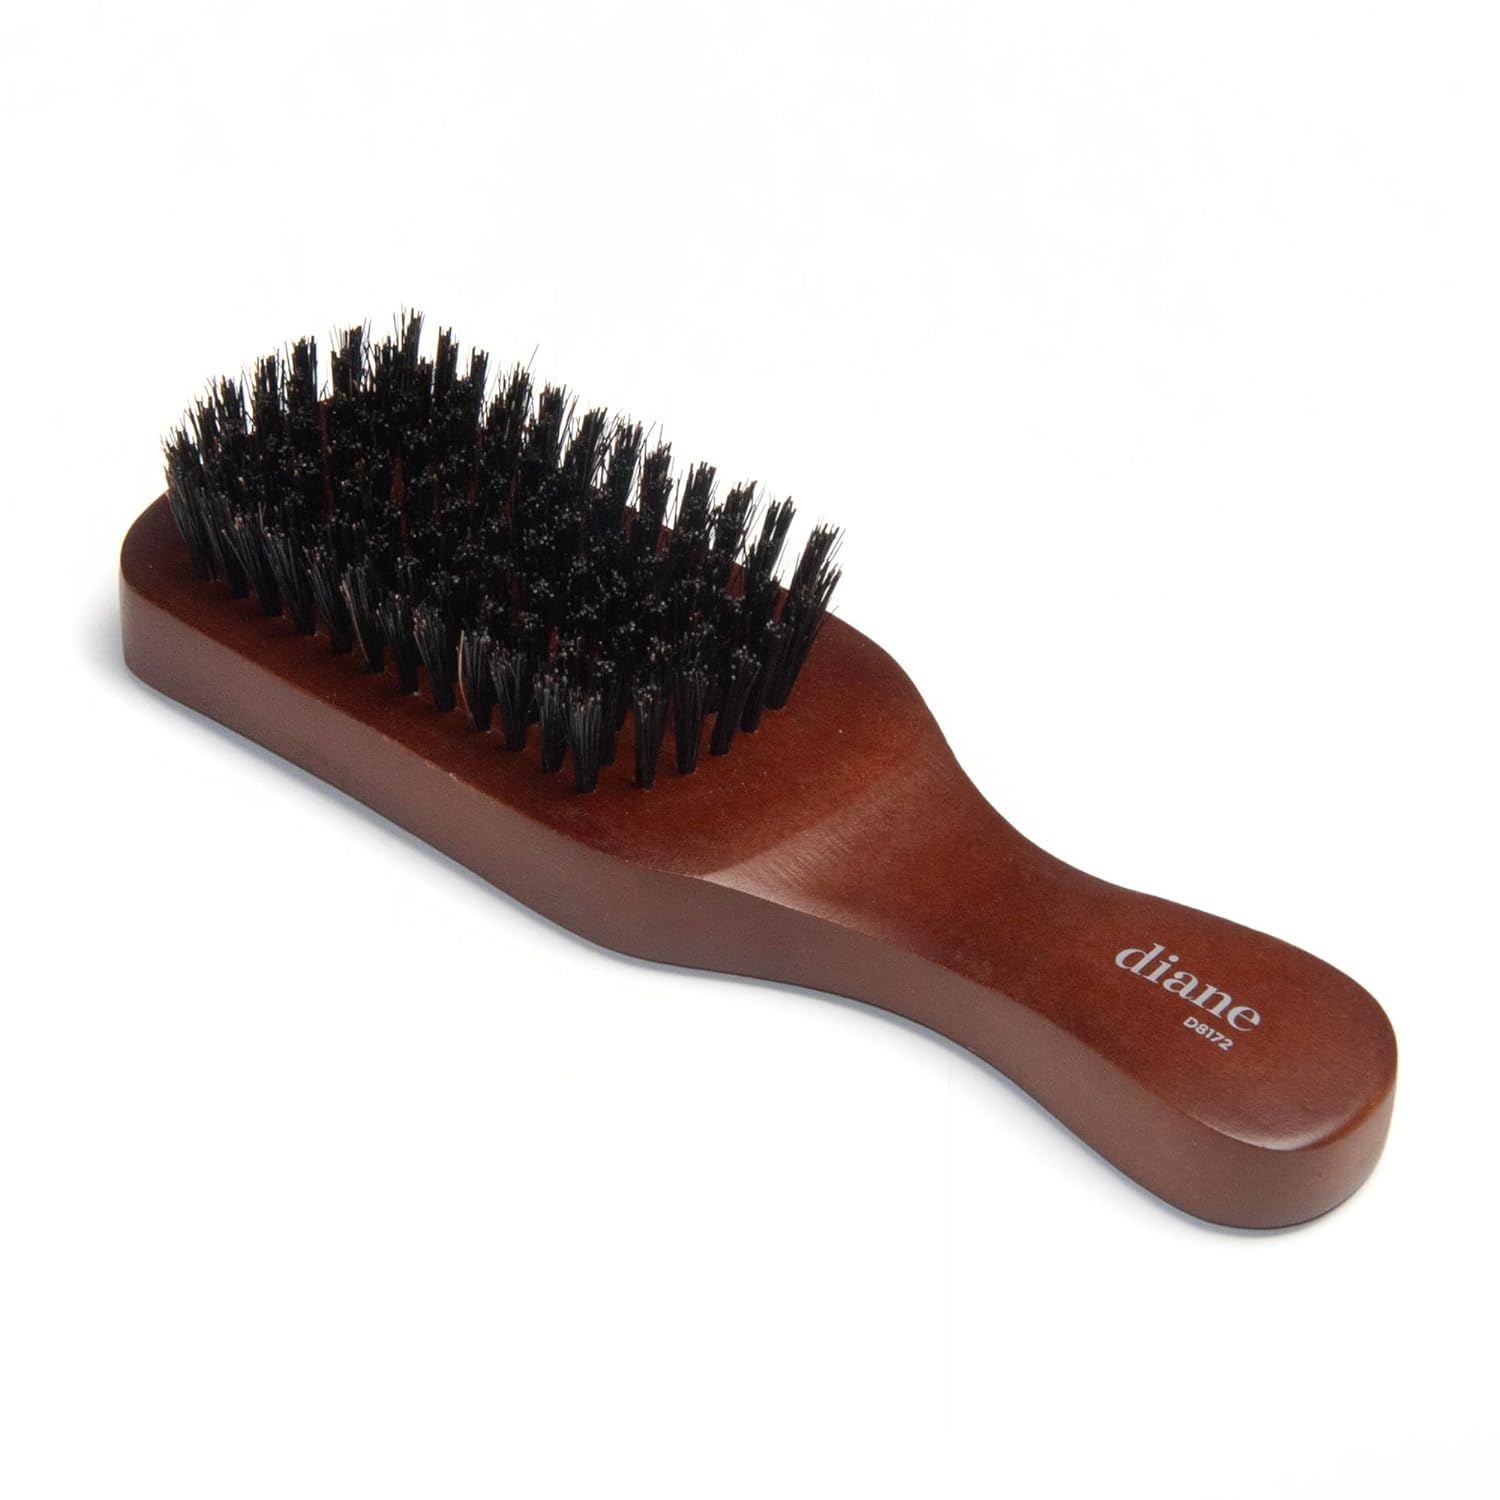 Diane Reinforced Boar Bristle Club Wave Brush for Men and Barbers – Medium Bristles for Thick and Curly Hair – Use for Detangling, Smoothing, Wave Styles, Restore Shine and Texture